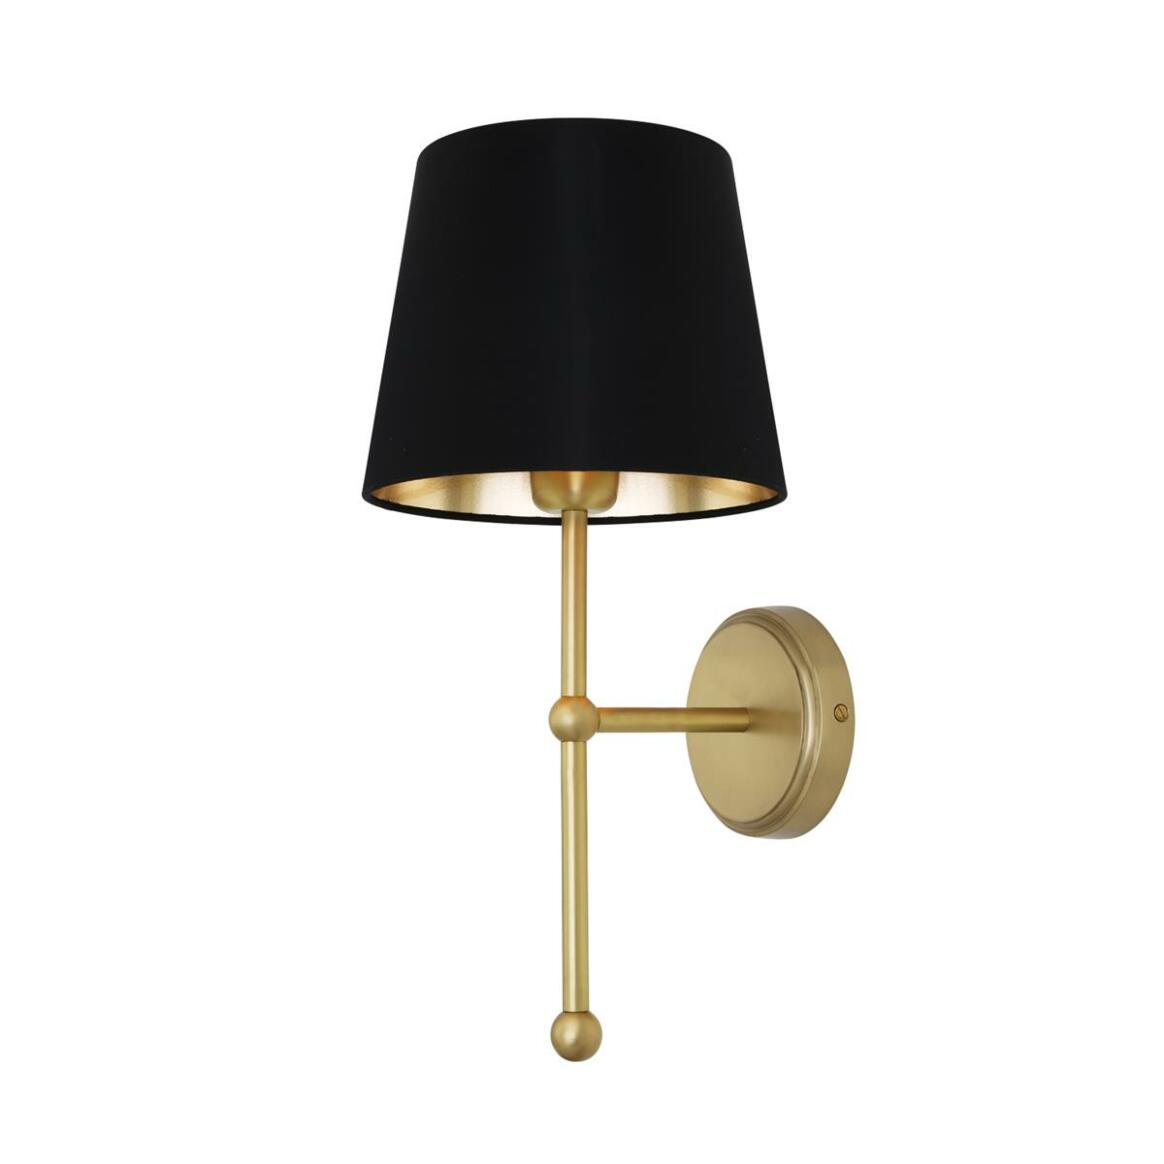 California Contemporary Brass Wall Light with Empire Fabric Shade main product image